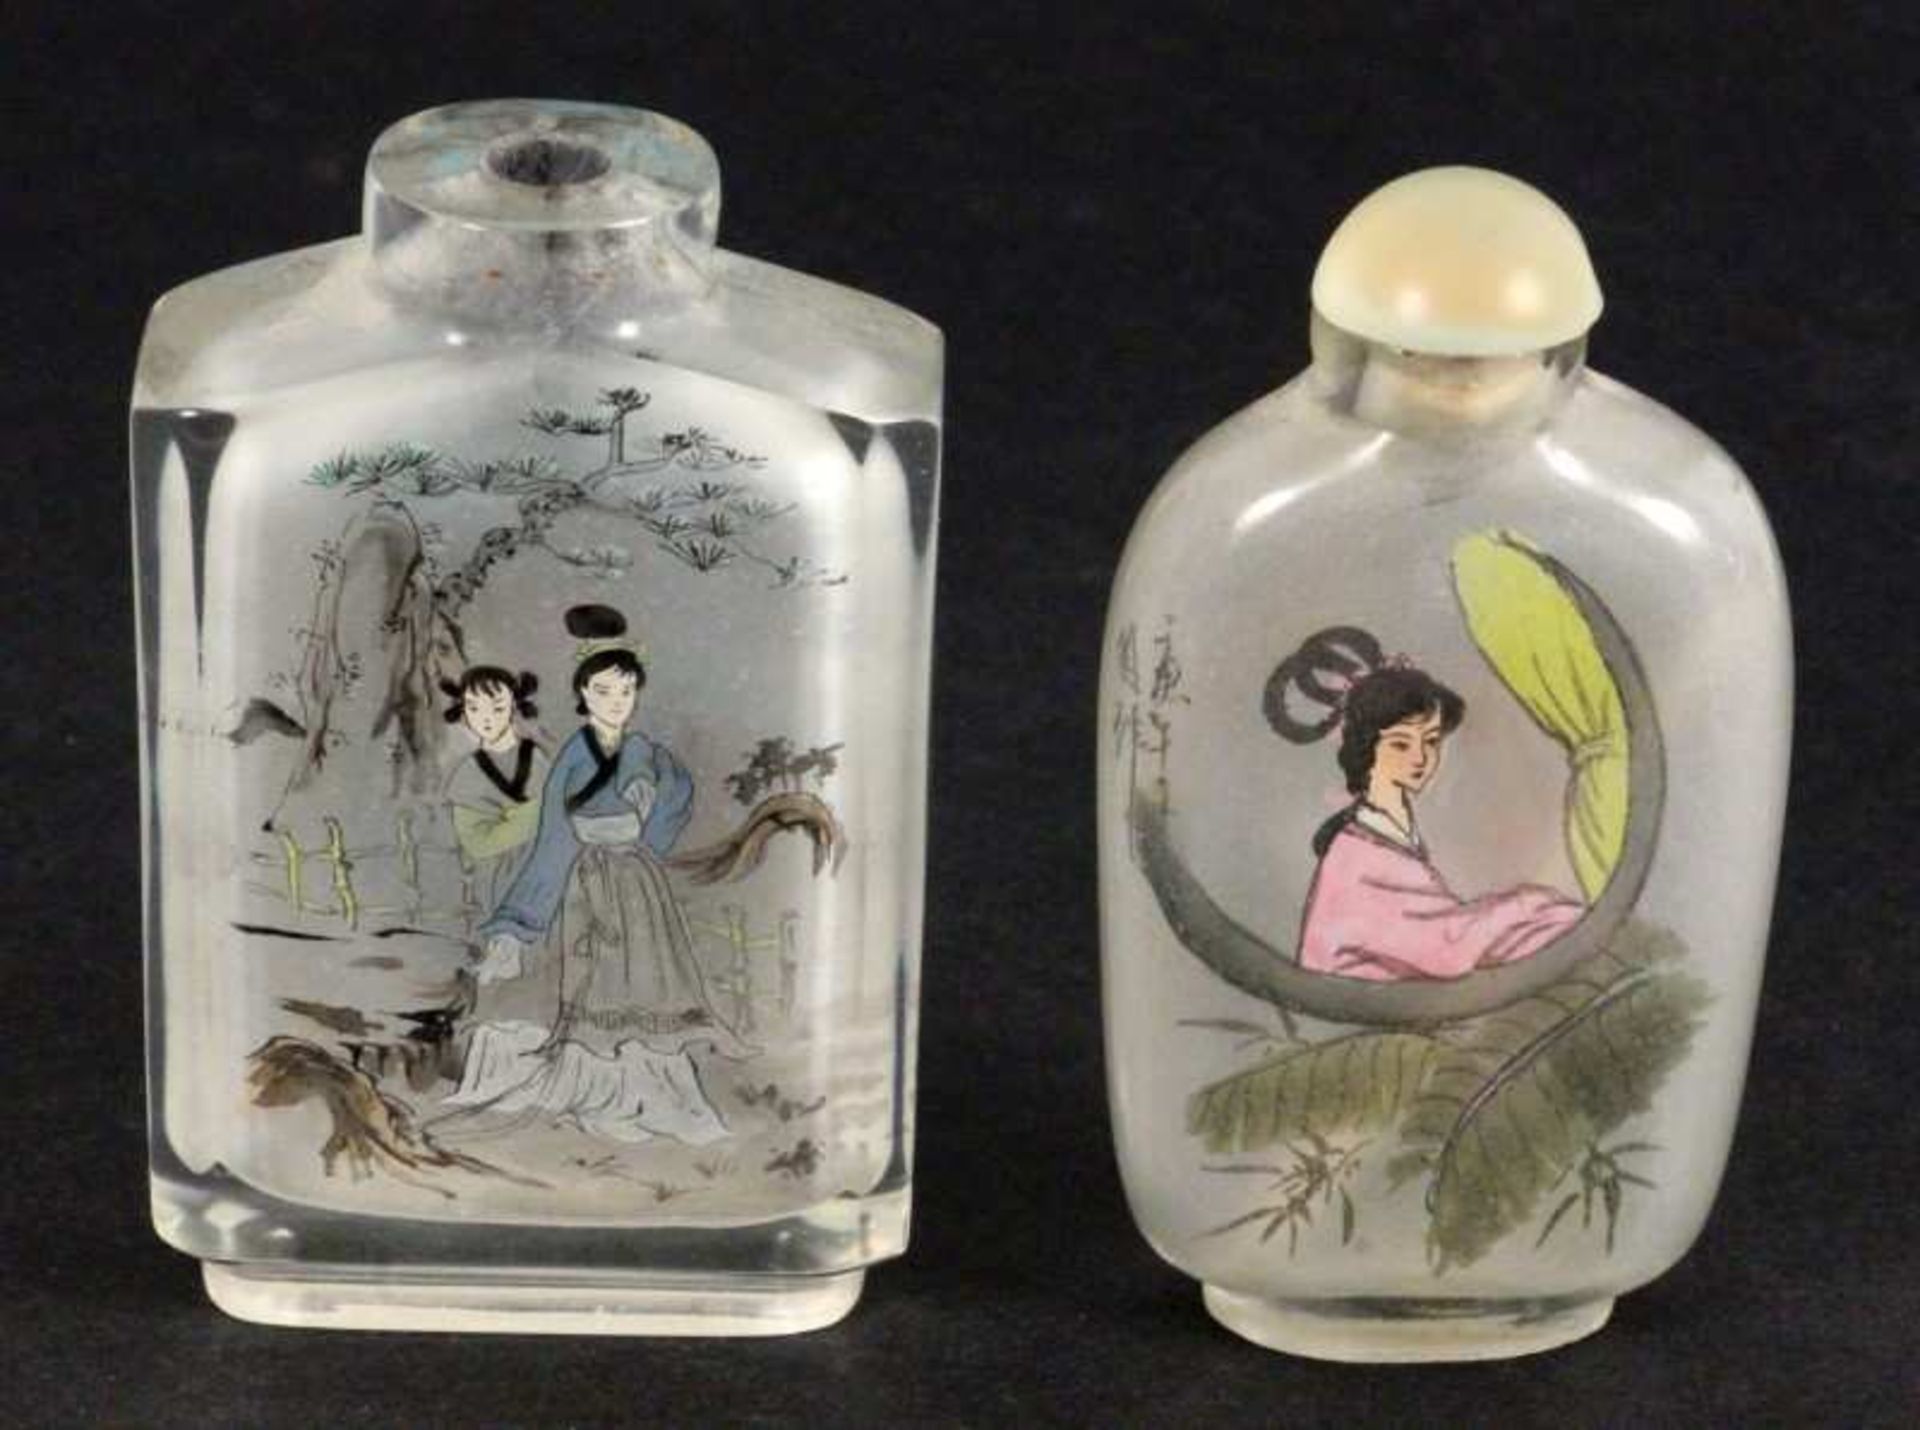 LOT VON 2 SNUFFBOTTLES China Glas mit farbiger Innenbemalung. H.7,5cm A LOT OF 2 SNUFF BOTTLES China